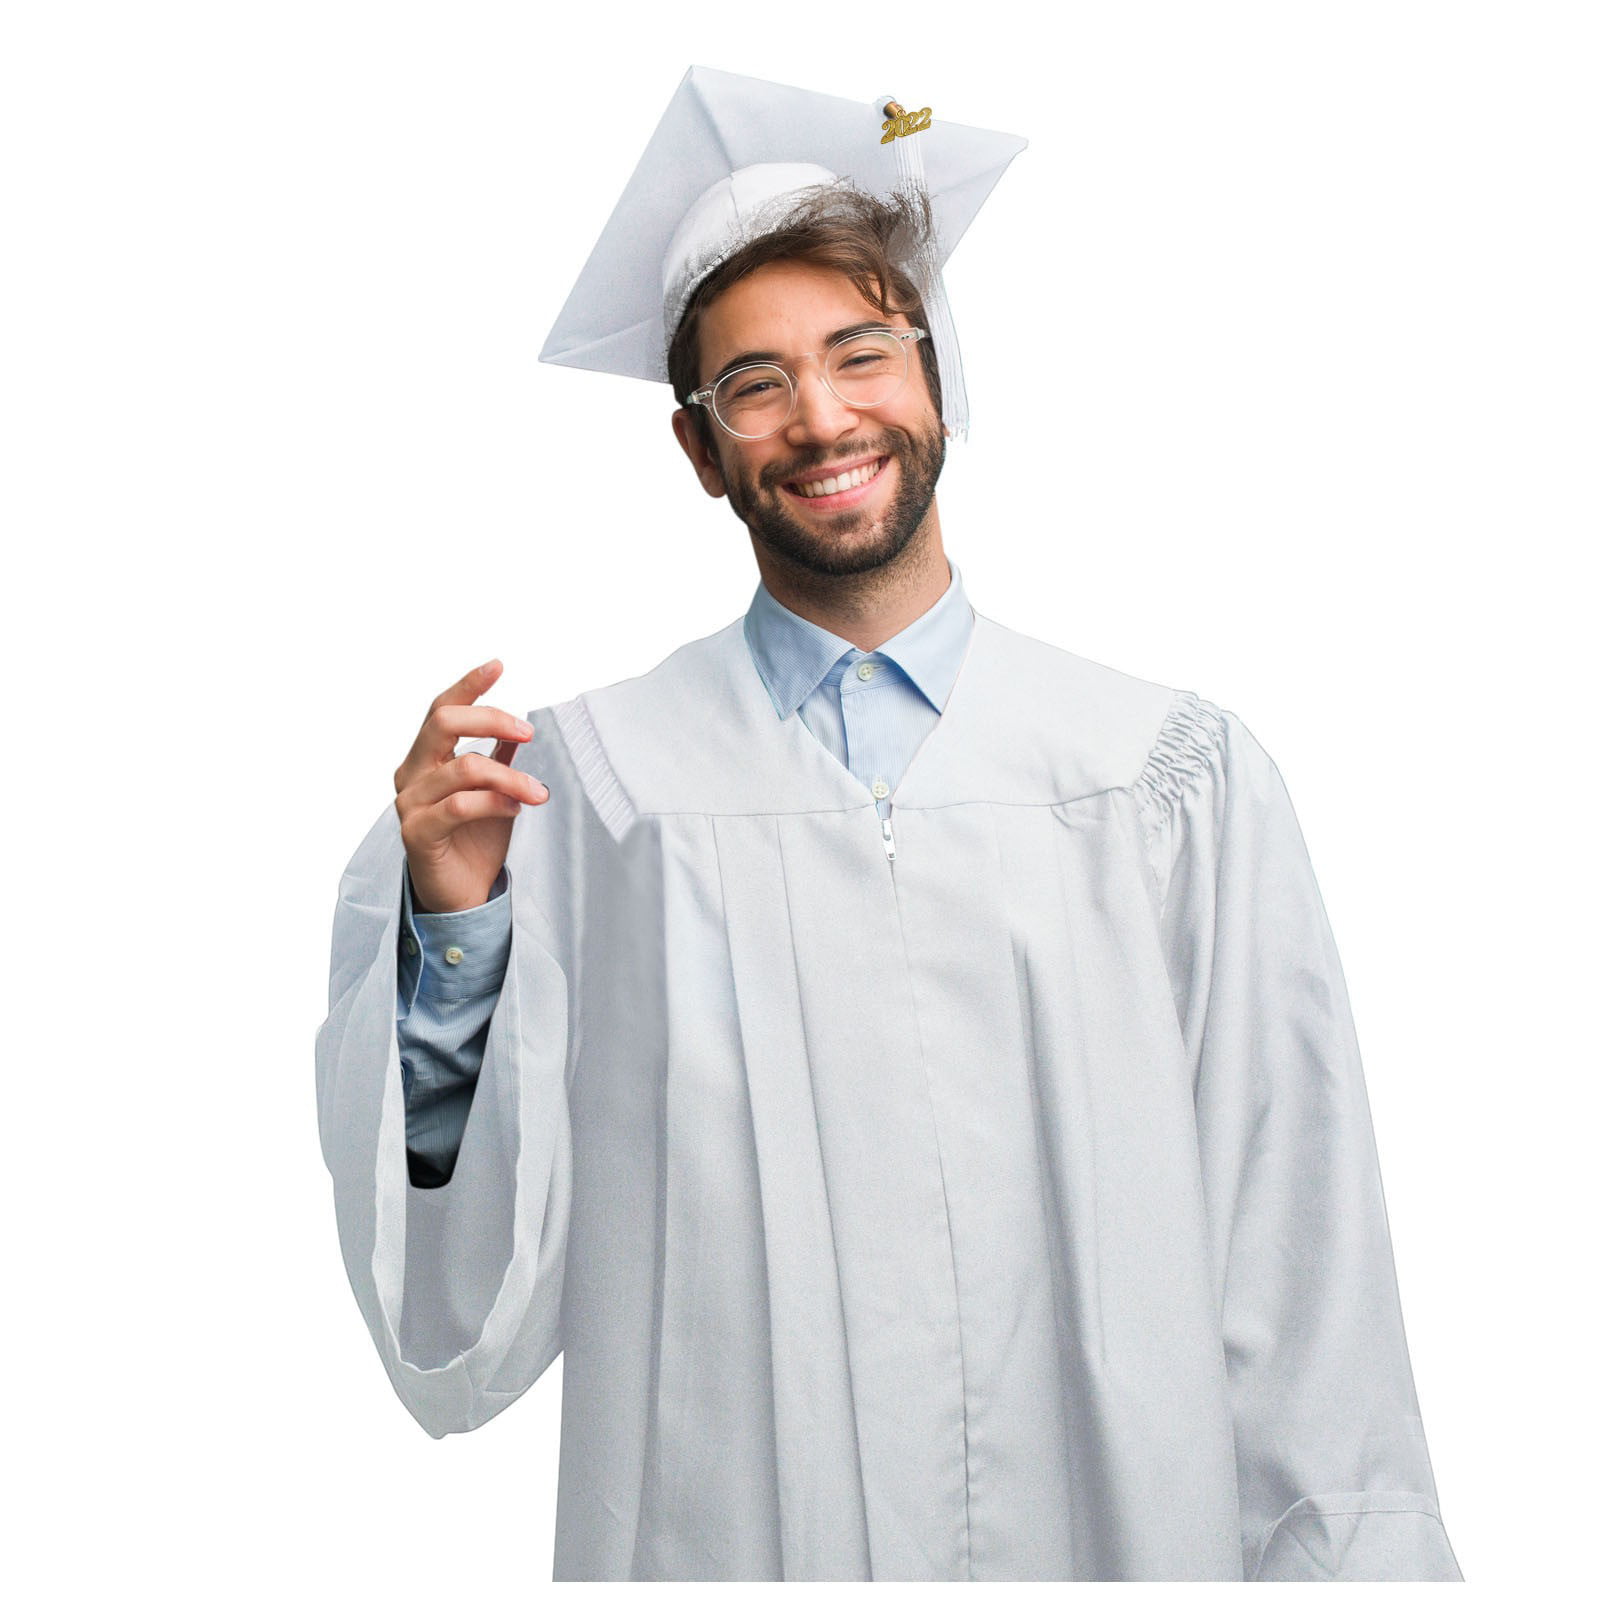 Smiling man wearing graduation hat Stock Photo by seventyfourimages